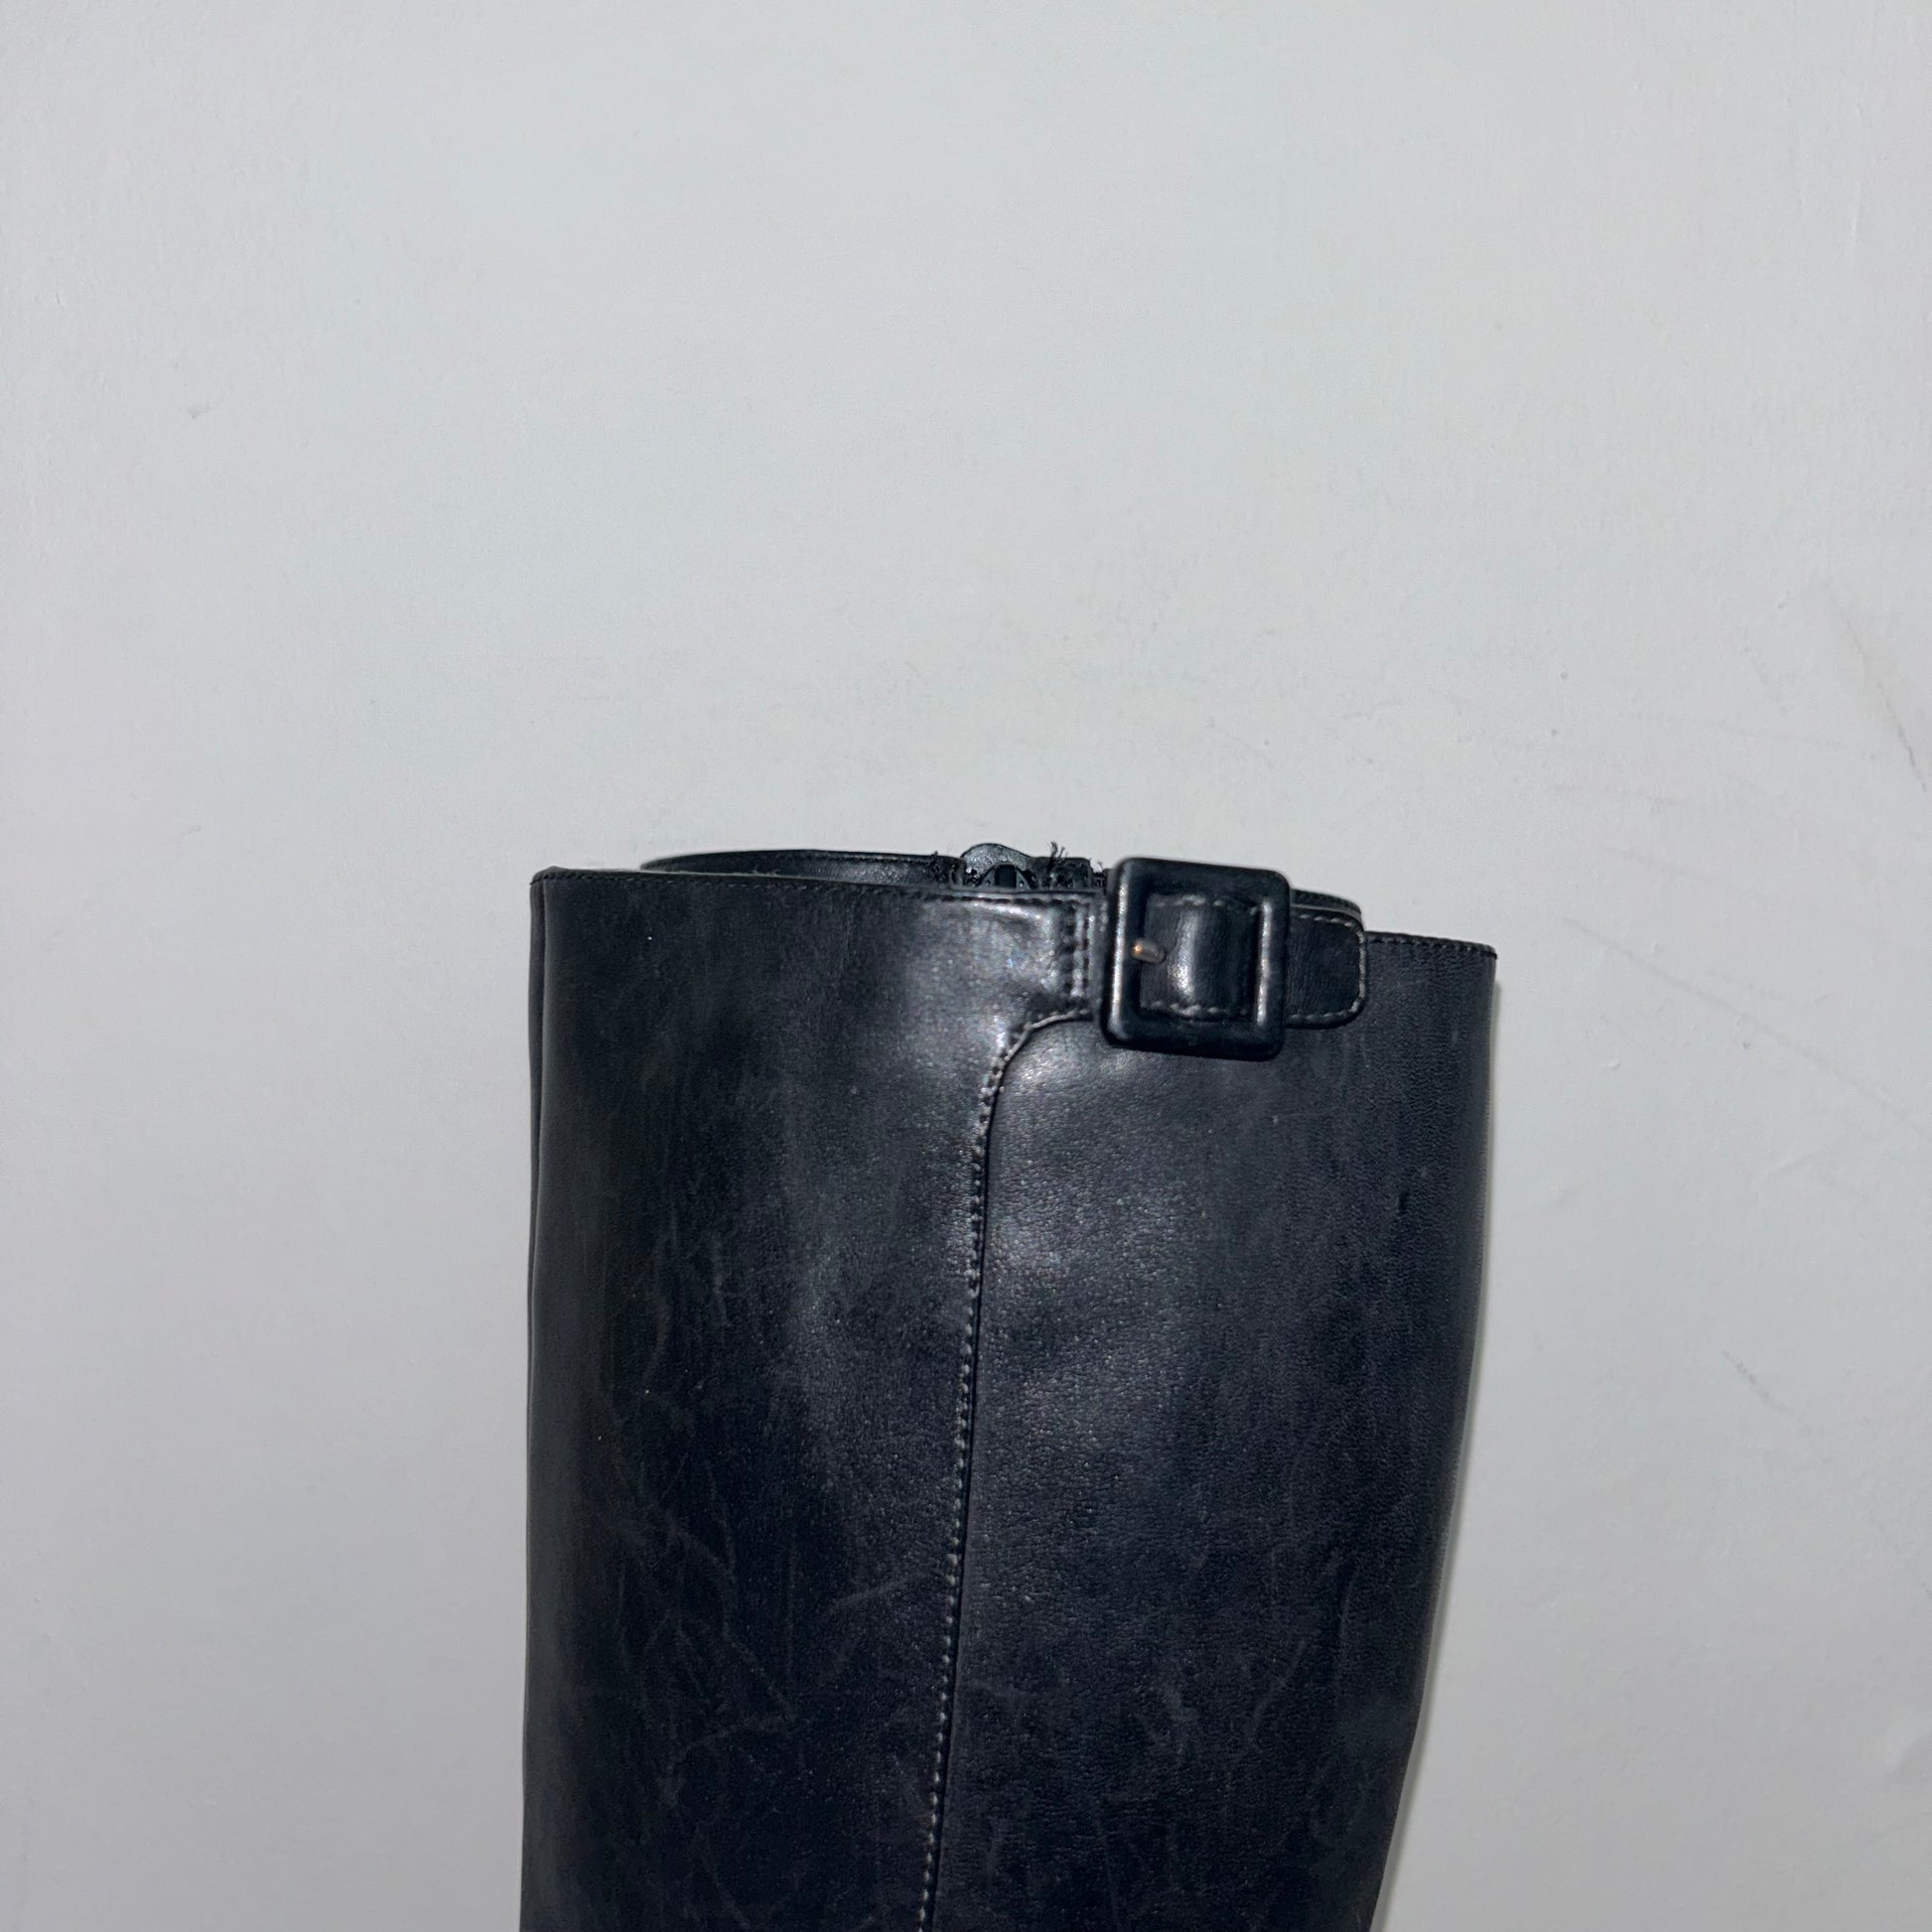 close up of black knee high boots shown on a white background